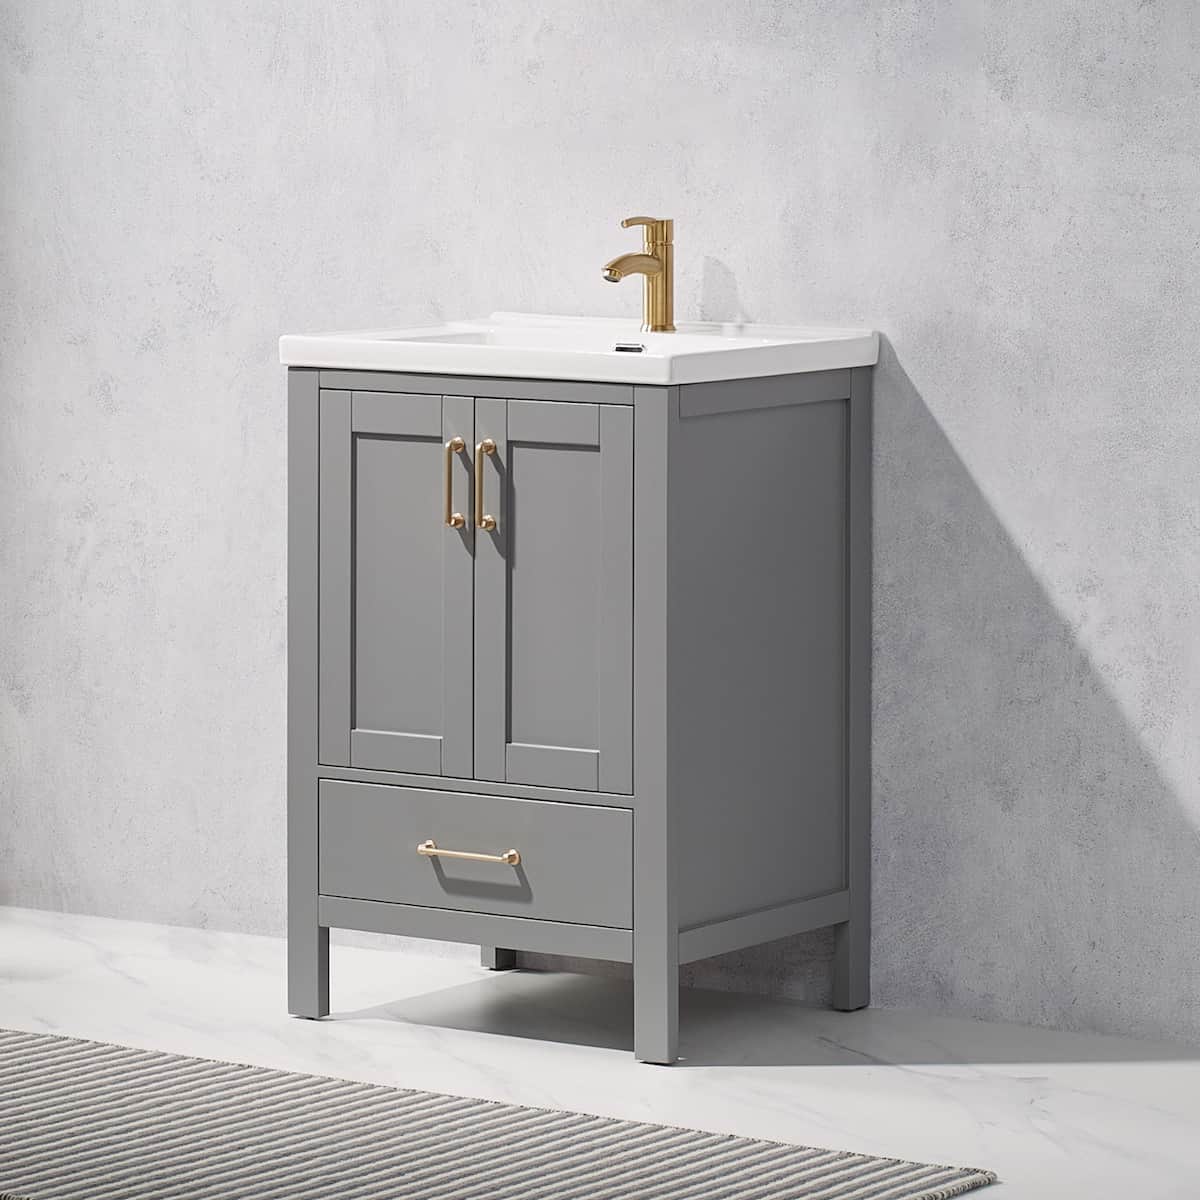 Vinnova Gela 24 Inch Grey Freestanding Single Sink Bath Vanity with Drop-In White Ceramic Basin Without Mirror Right Side 723024—GR-WH-NM